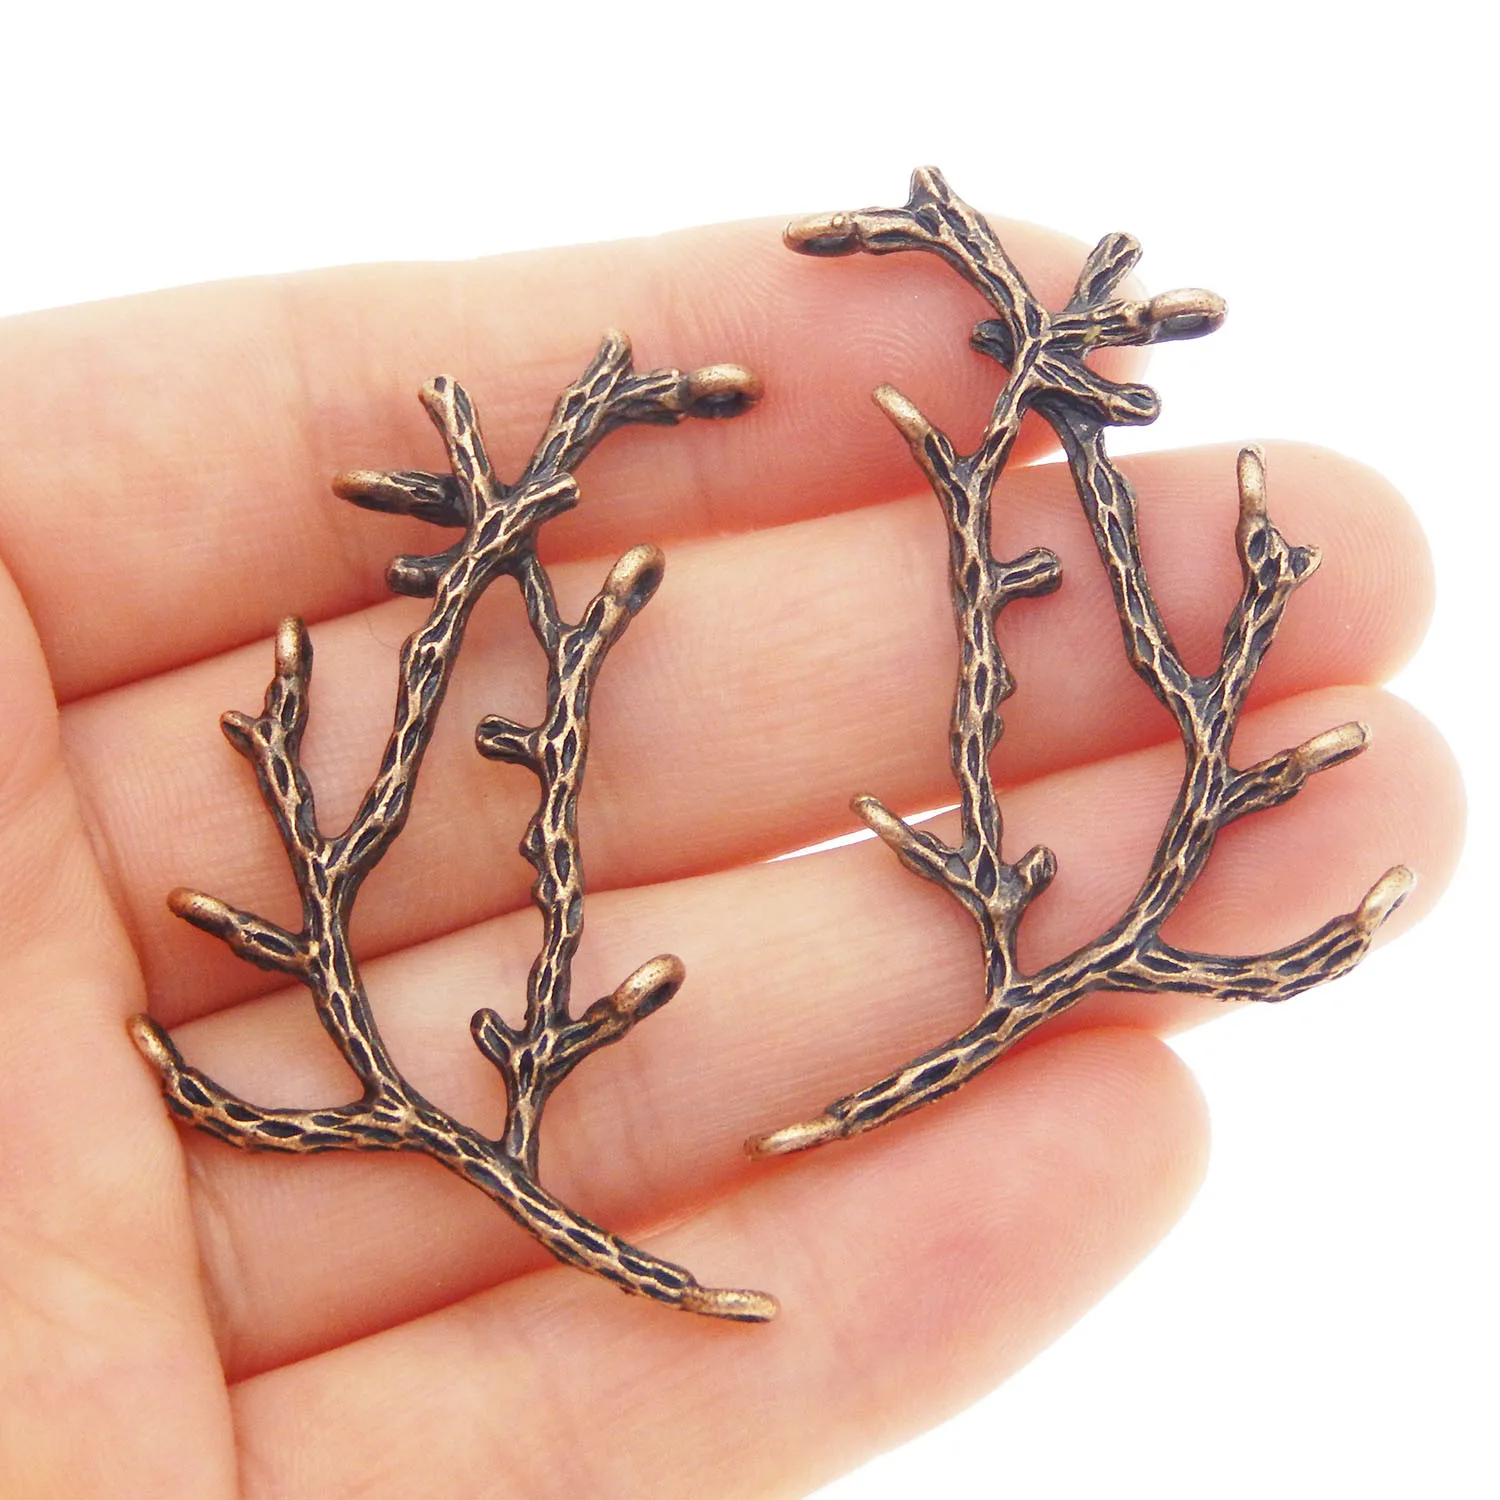 GraceAngie 30PCS Copper Suspension Tree Branch Handmade Crafts Holes Charms Hanging Jewelry Finding Accessory 52*23*3mm